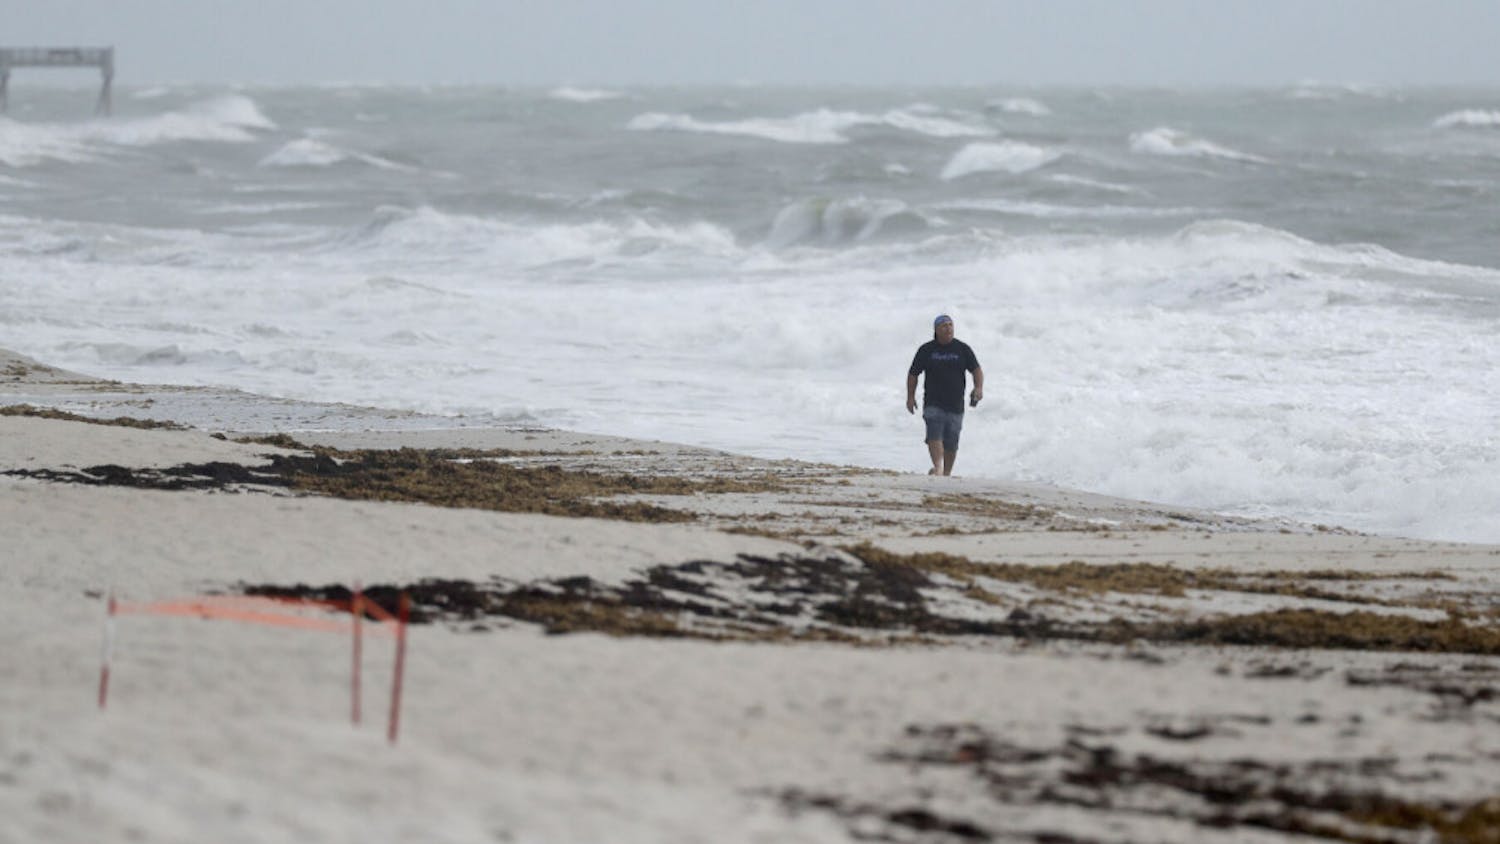 A beach goer walks along the shore as waves churned up by Tropical Storm Isaias crash near Jaycee Beach Park, Sunday, Aug. 2, 2020, in Vero Beach, Fla. Isaias weakened from a hurricane to a tropical storm late Saturday afternoon, but was still expected to bring heavy rain and flooding as it barrels toward Florida. (AP Photo/Wilfredo Lee)